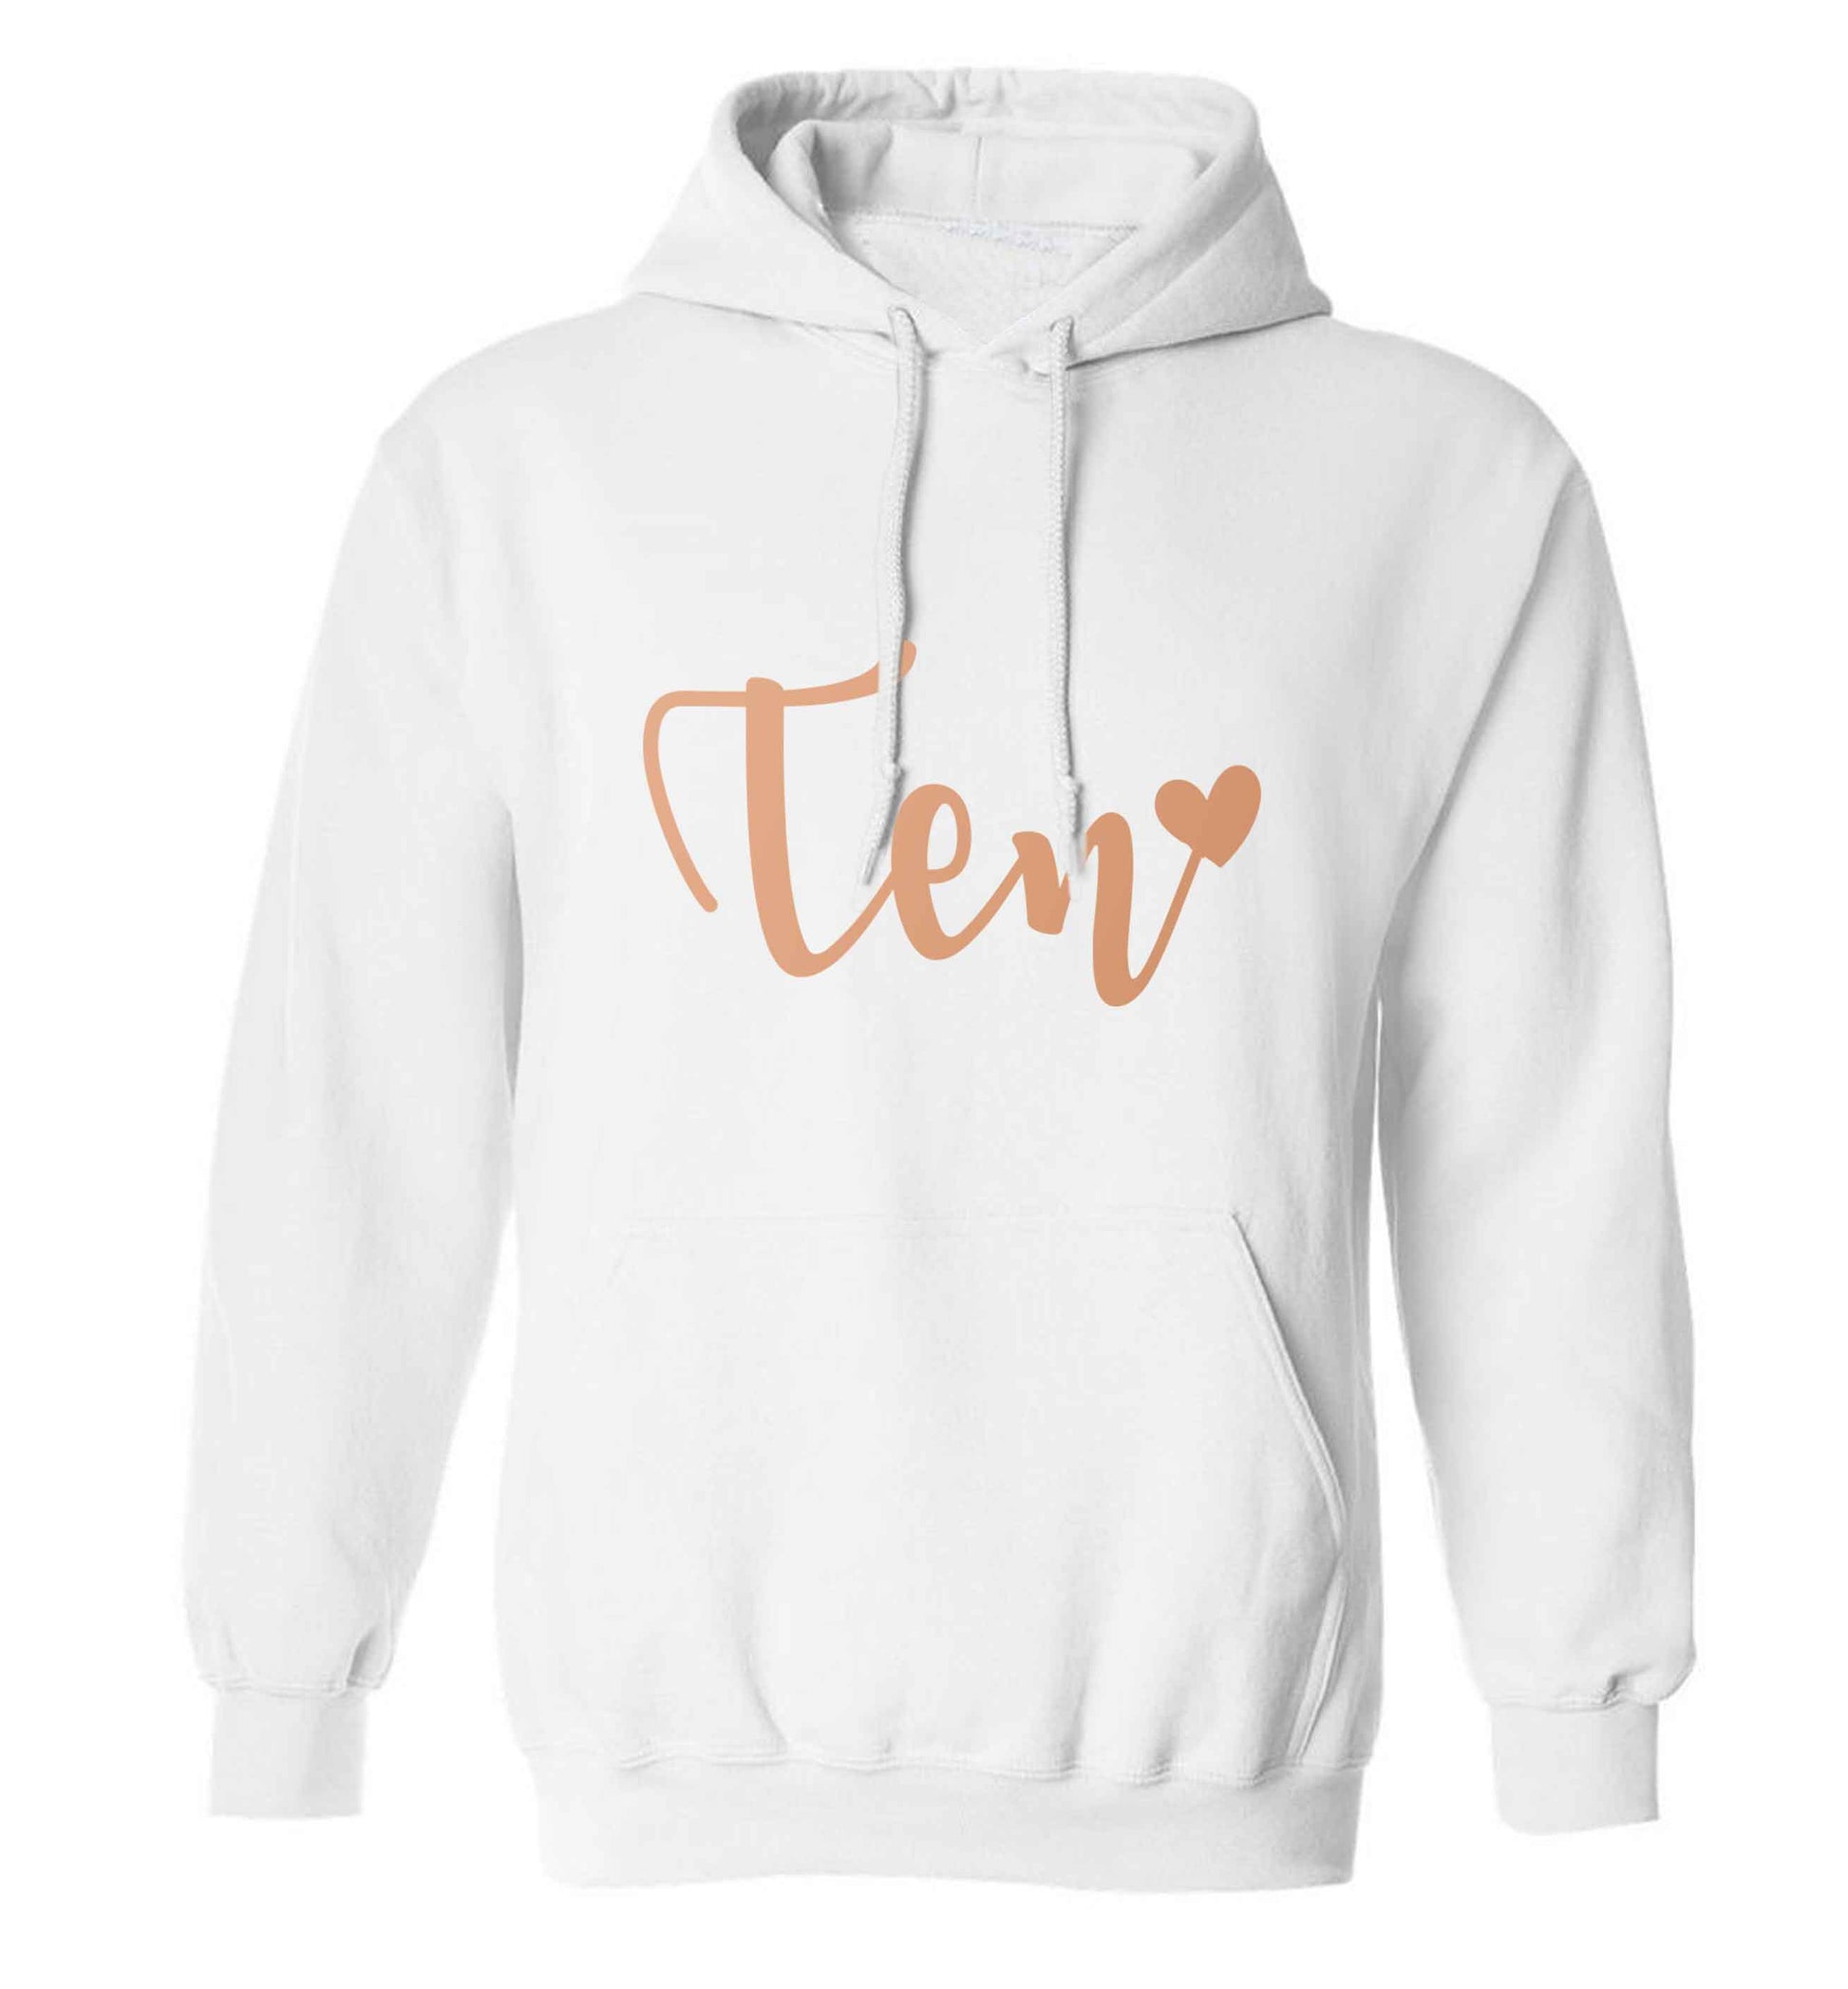 Rose gold eleven adults unisex white hoodie 2XL